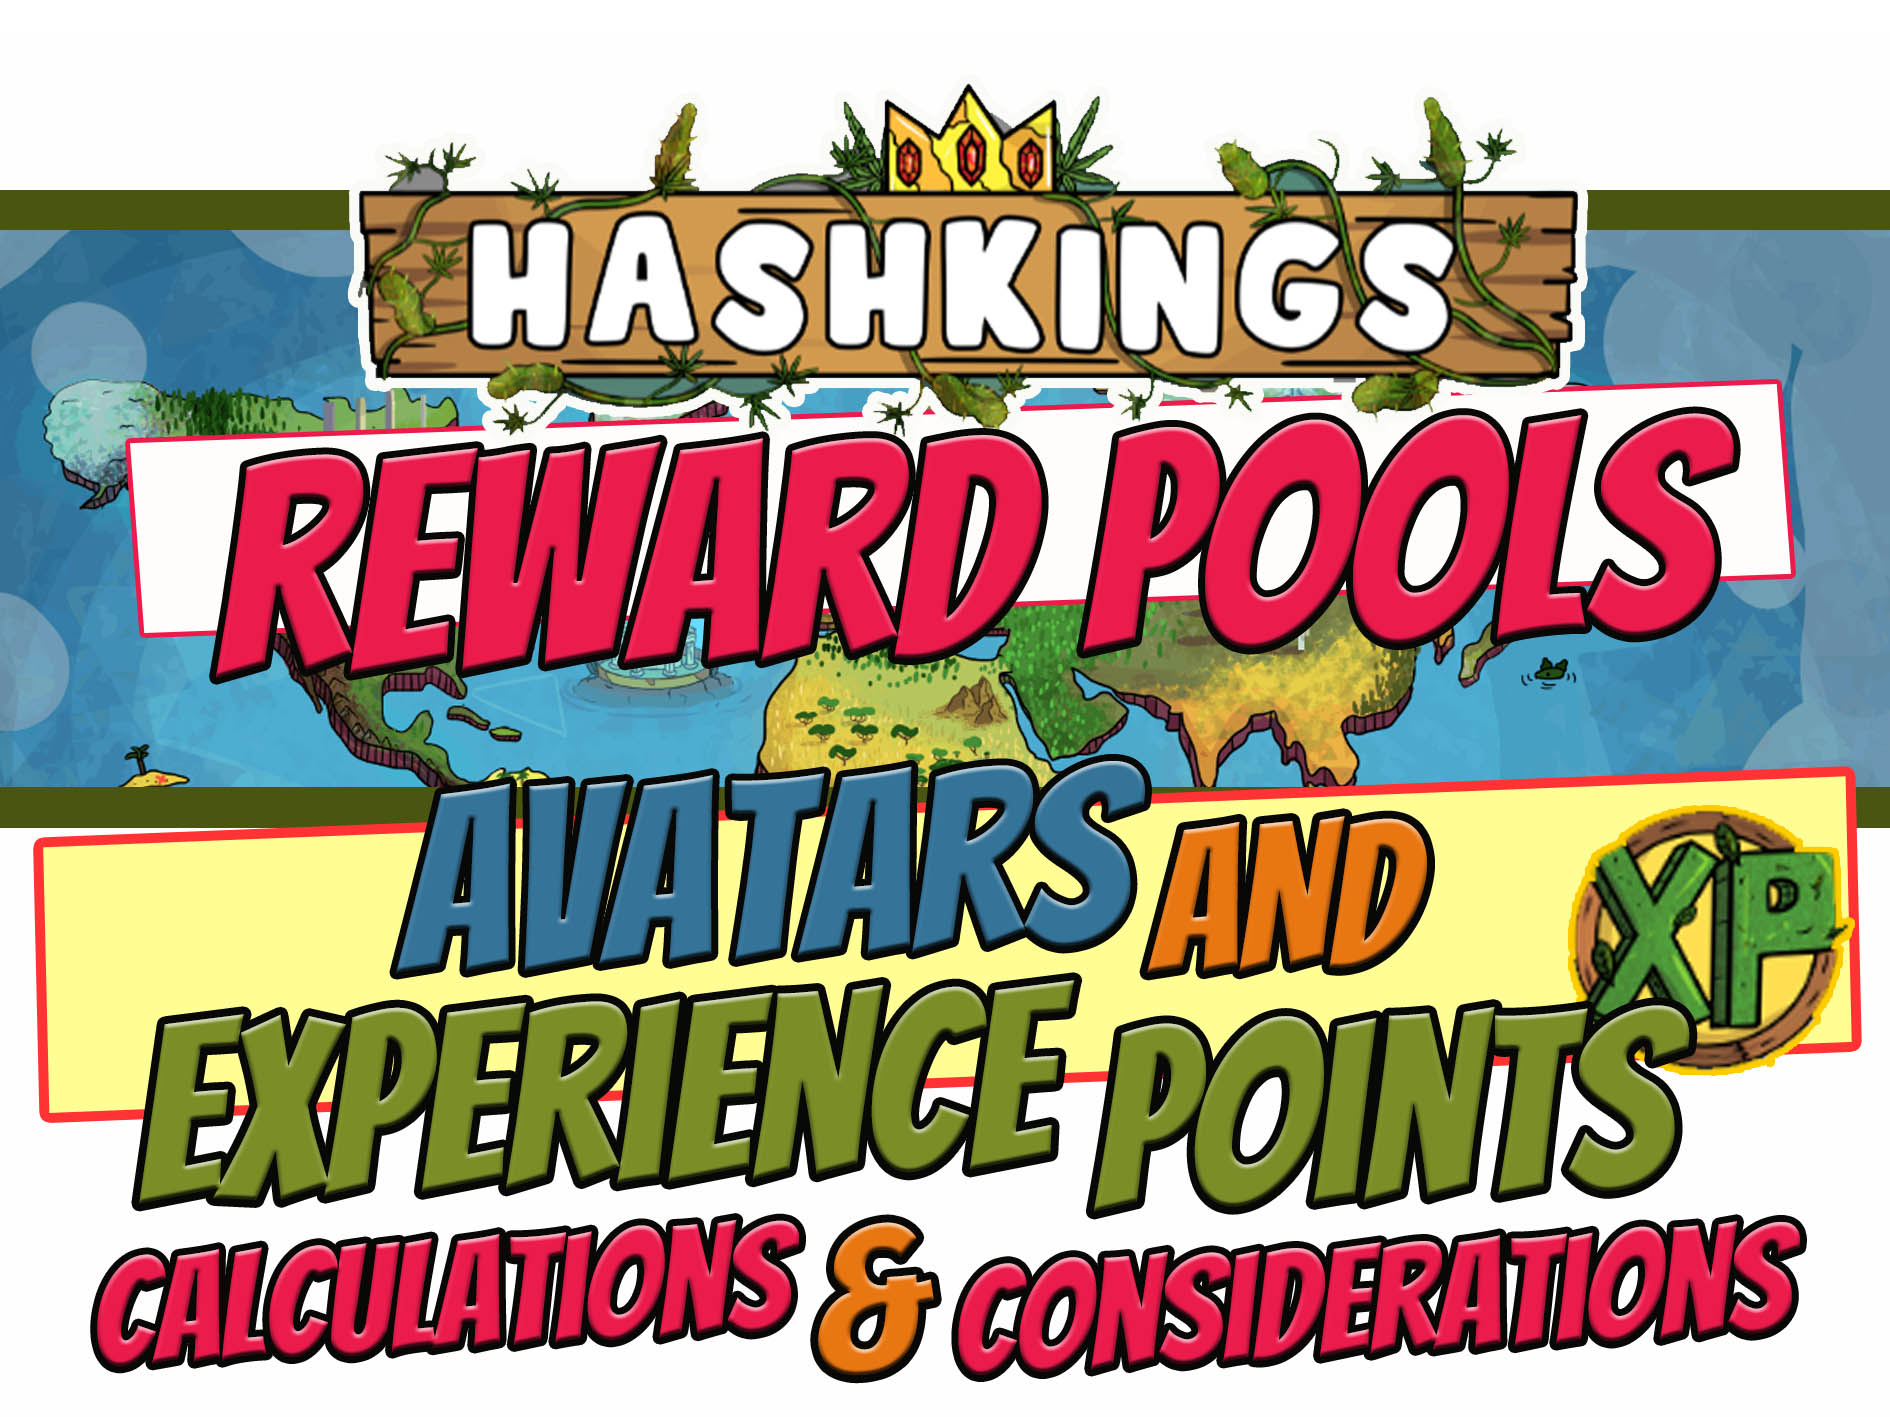 @libertycrypto27/hashkings-reward-pools-avatar-and-experience-points-xp-joints-type-nfts-and-the-xpdollar-ratio-calculation-engita